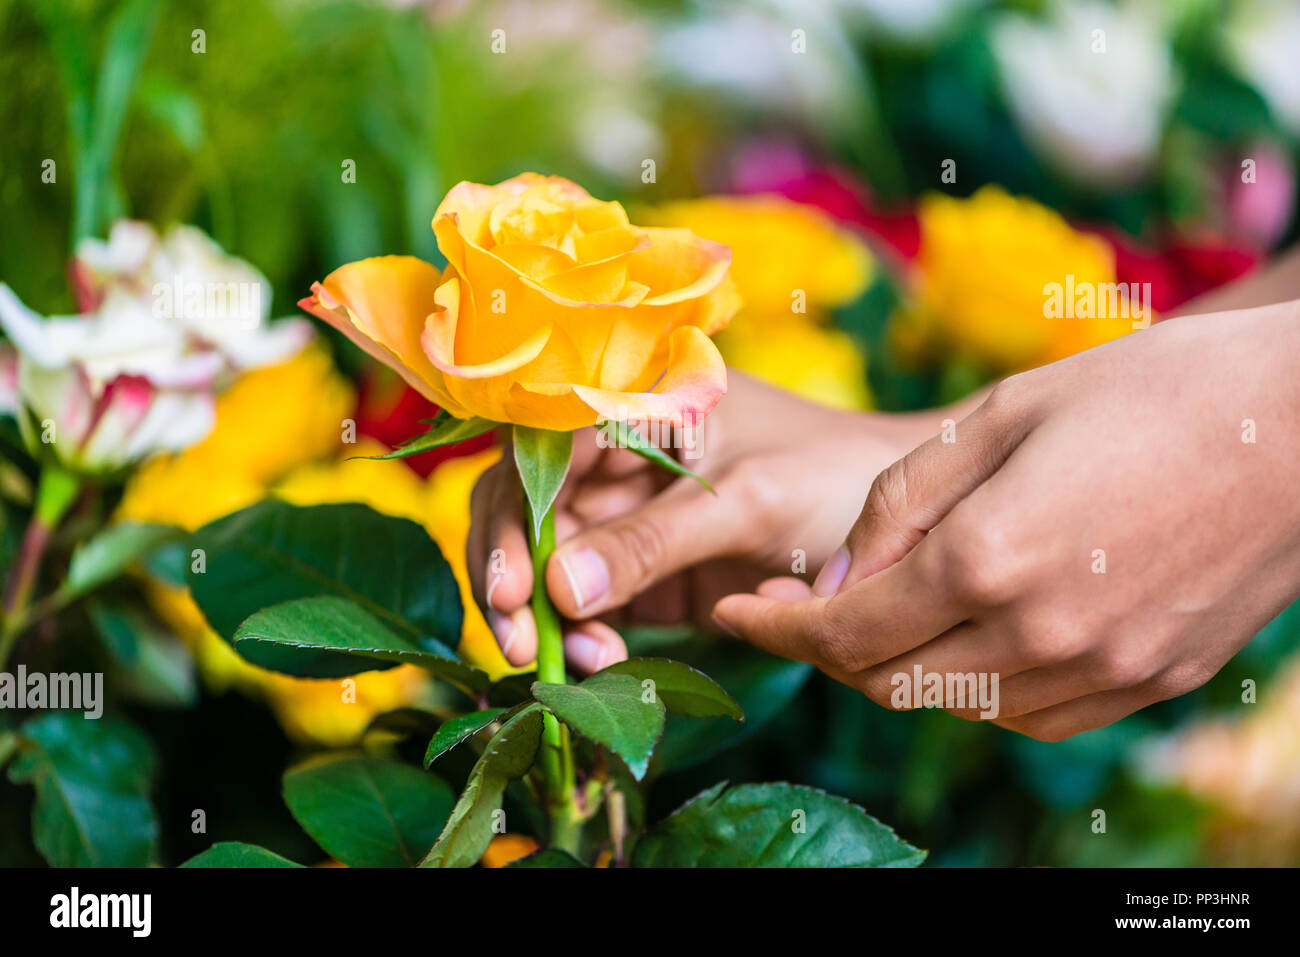 Hand of a man picking up a beautiful yellow rose Stock Photo